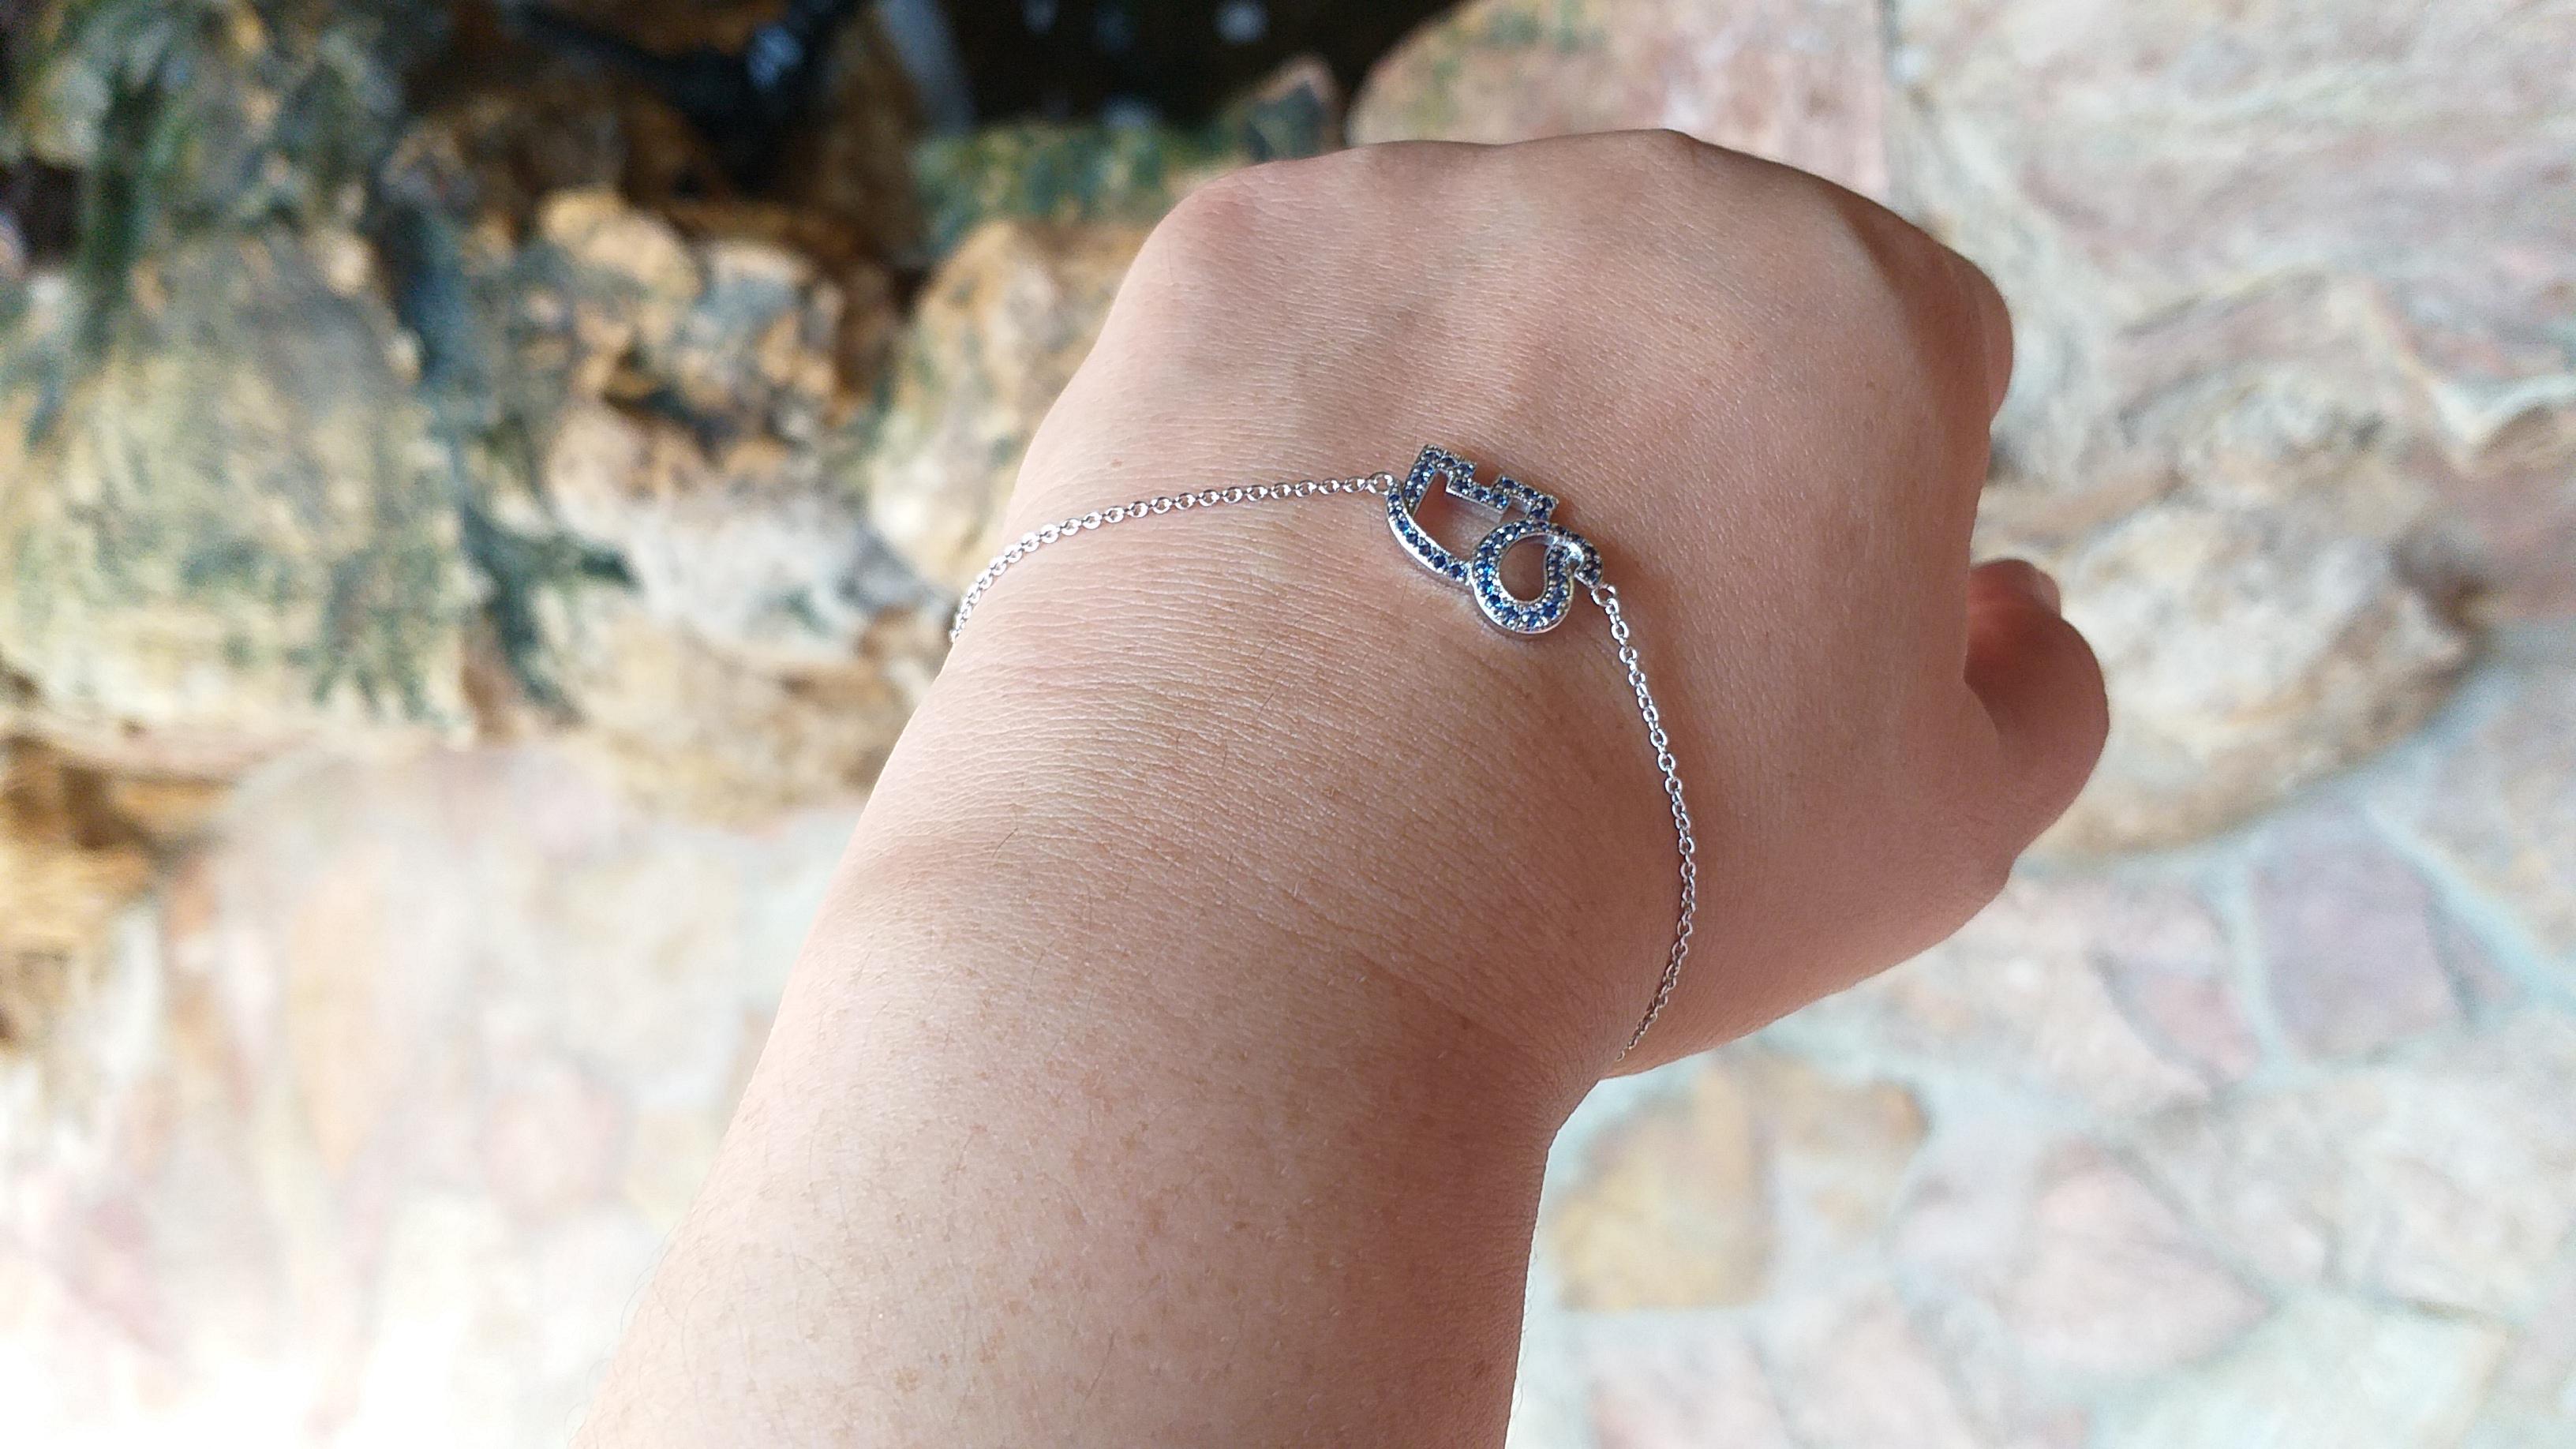 Blue Sapphire Bracelet set in Silver Settings

Width:  1.3 cm 
Length: 7.0 cm
Total Weight: 1.65 grams


*Please note that the silver setting is plated with rhodium to promote shine and help prevent oxidation.  However, with the nature of silver,